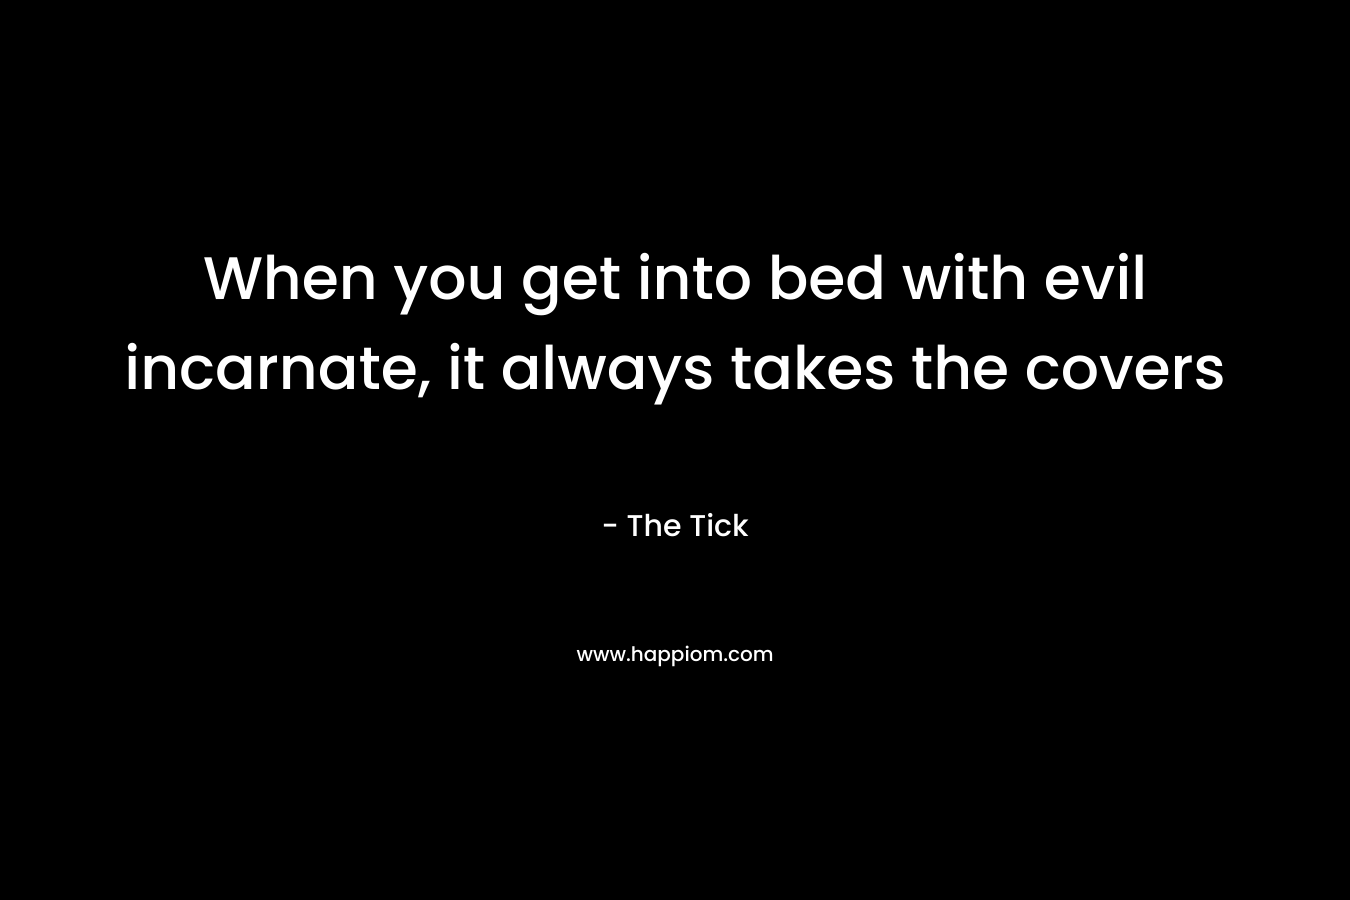 When you get into bed with evil incarnate, it always takes the covers – The Tick